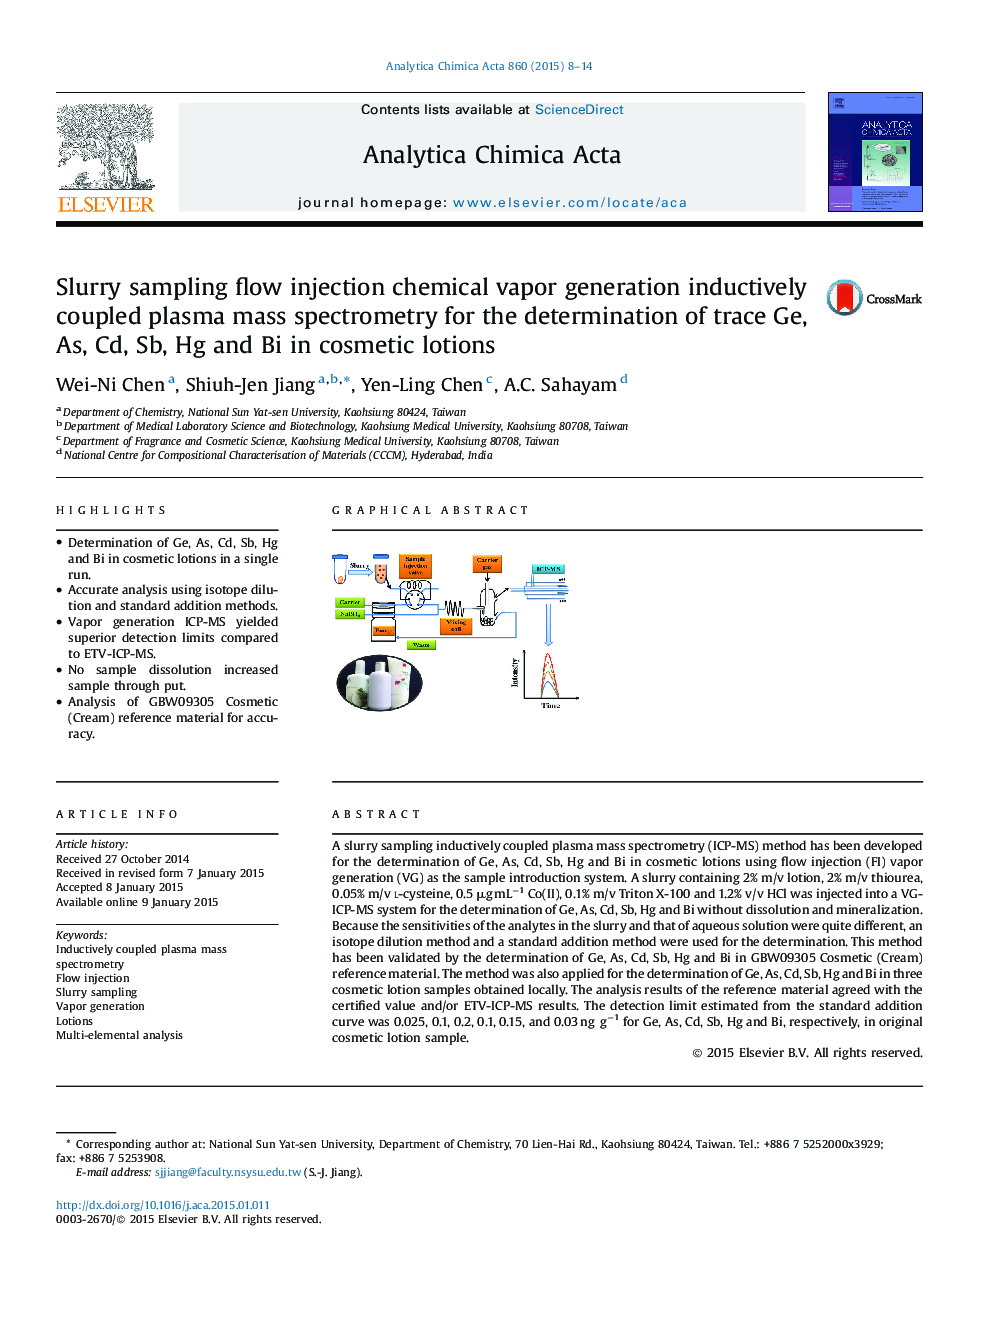 Slurry sampling flow injection chemical vapor generation inductively coupled plasma mass spectrometry for the determination of trace Ge, As, Cd, Sb, Hg and Bi in cosmetic lotions